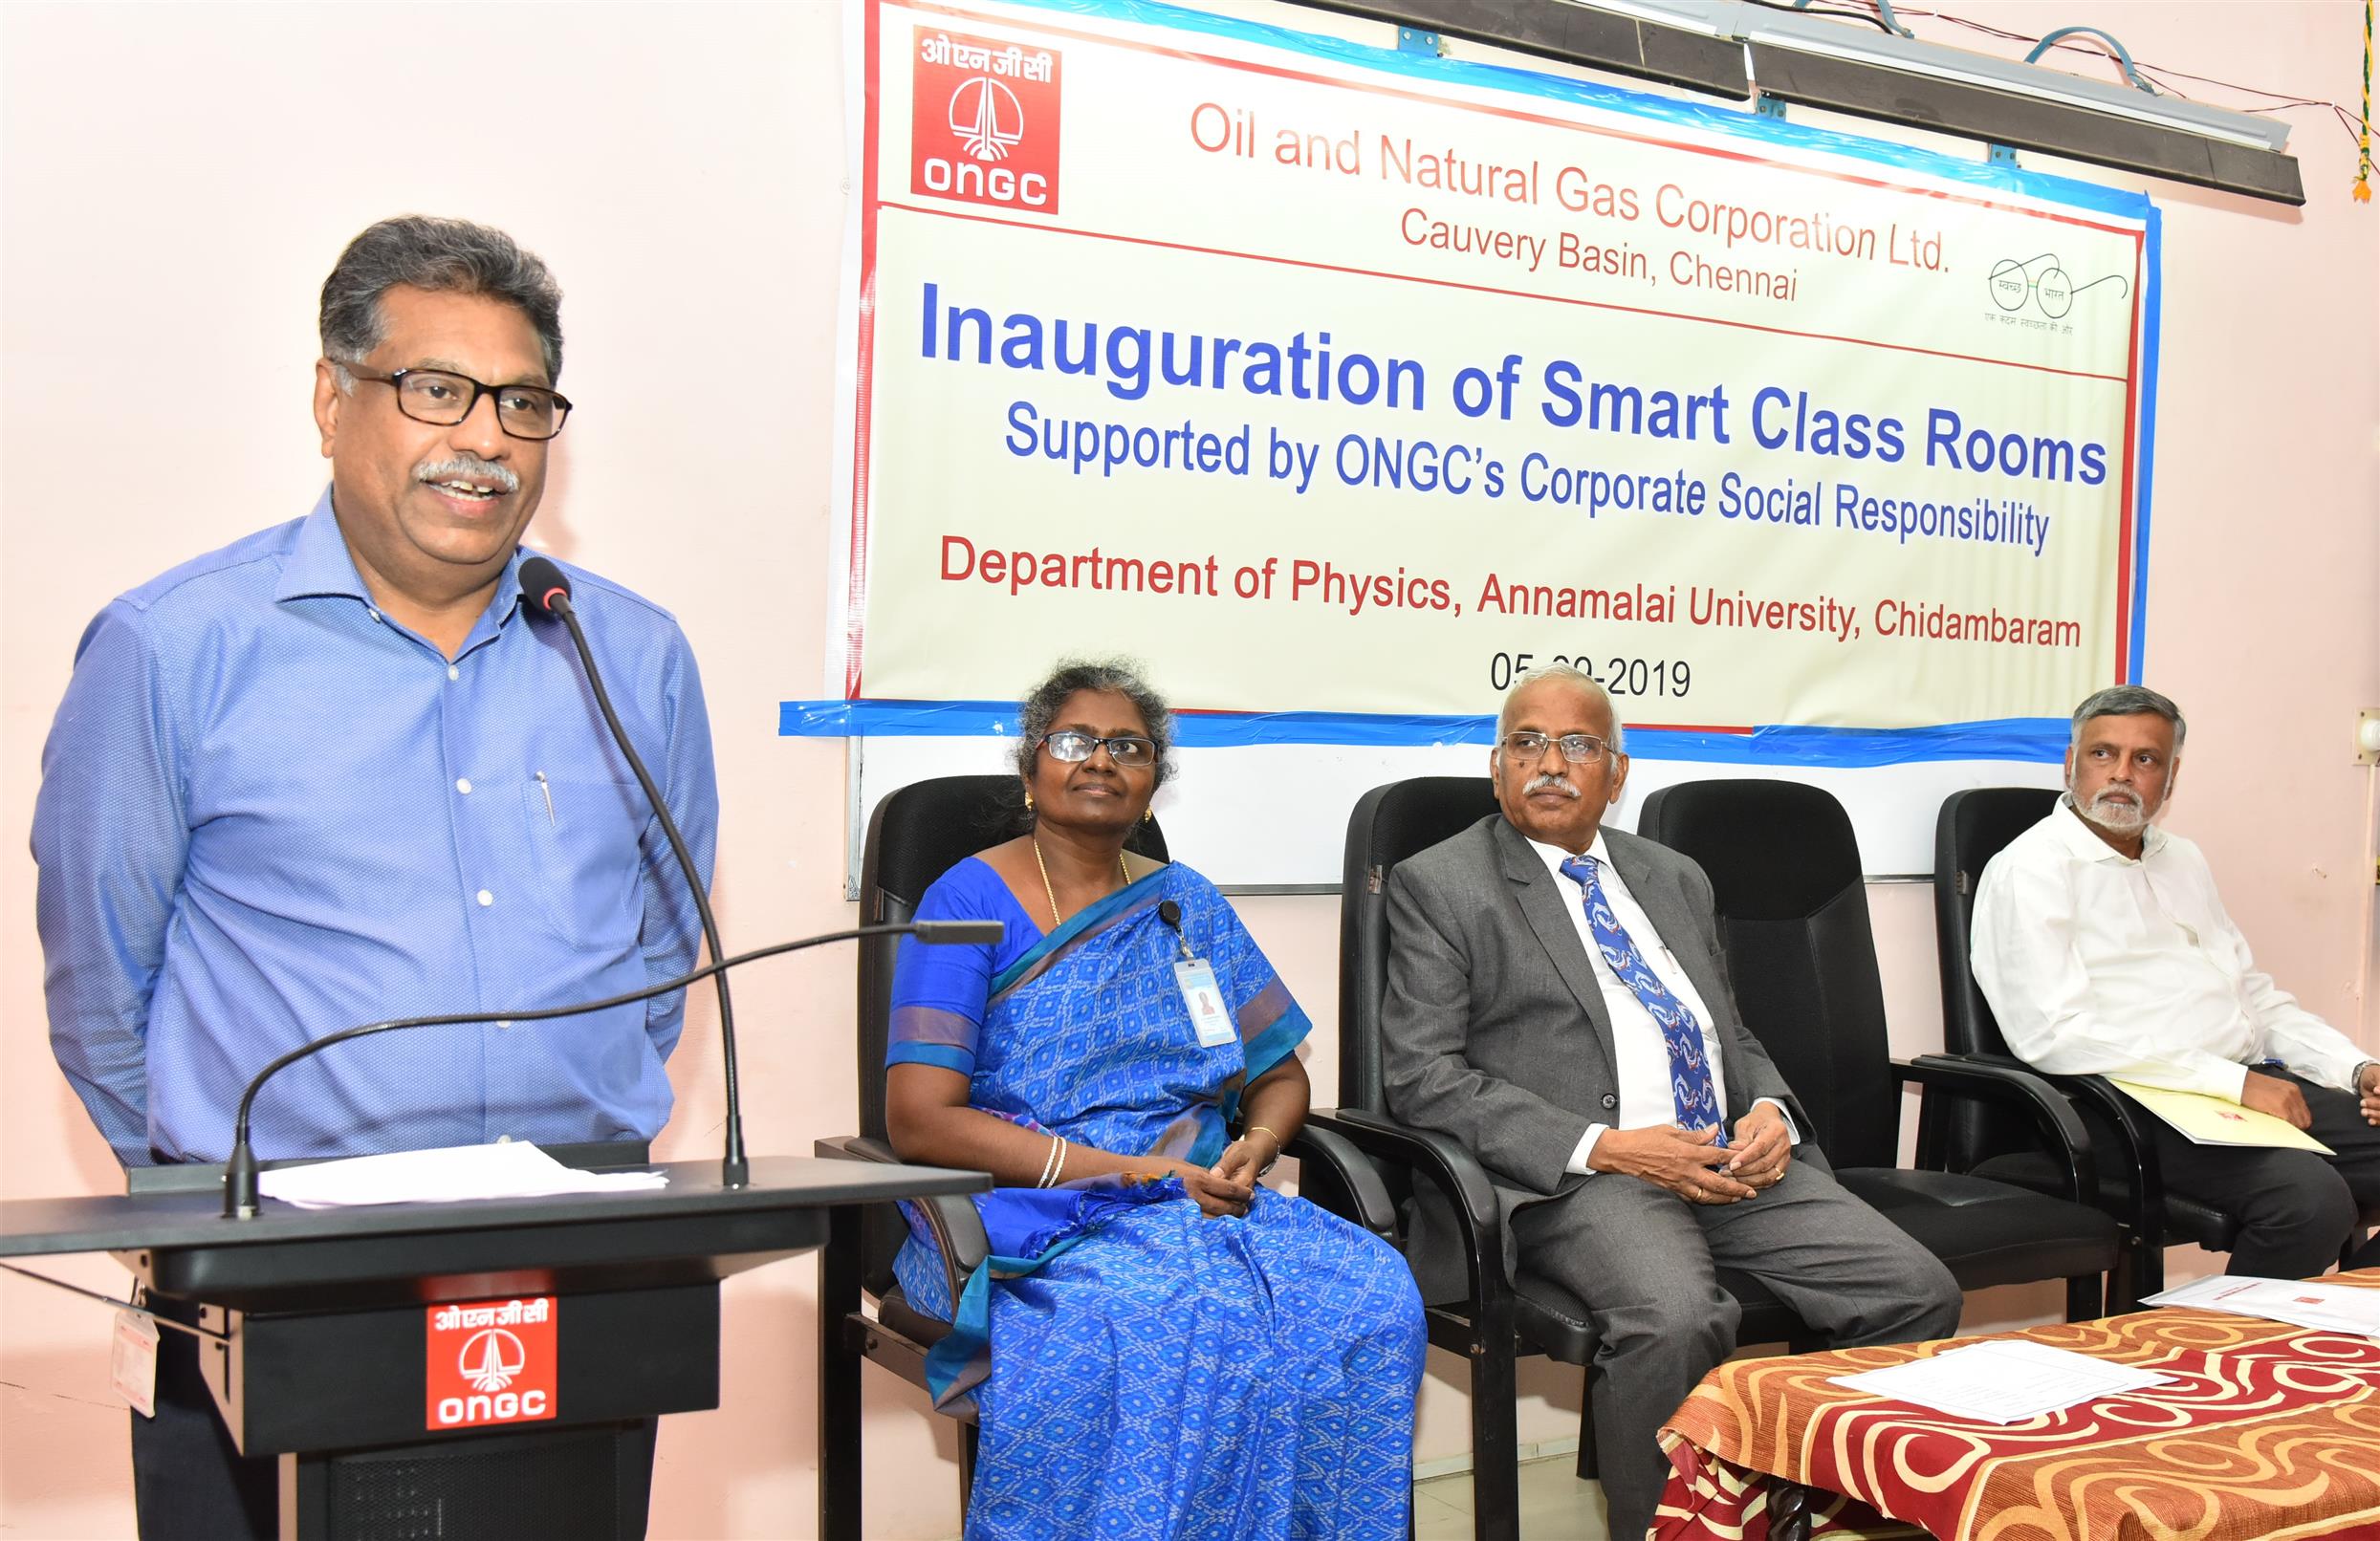 Mr. Syam Mohan V, Executive Director, ONGC Cauvery Basin, Chennai addressing the gathering at Annamalai University, Chidambaram after inauguration of Seven SMART class rooms at the Department of Physics, installed under ONGC’s CSR initiative